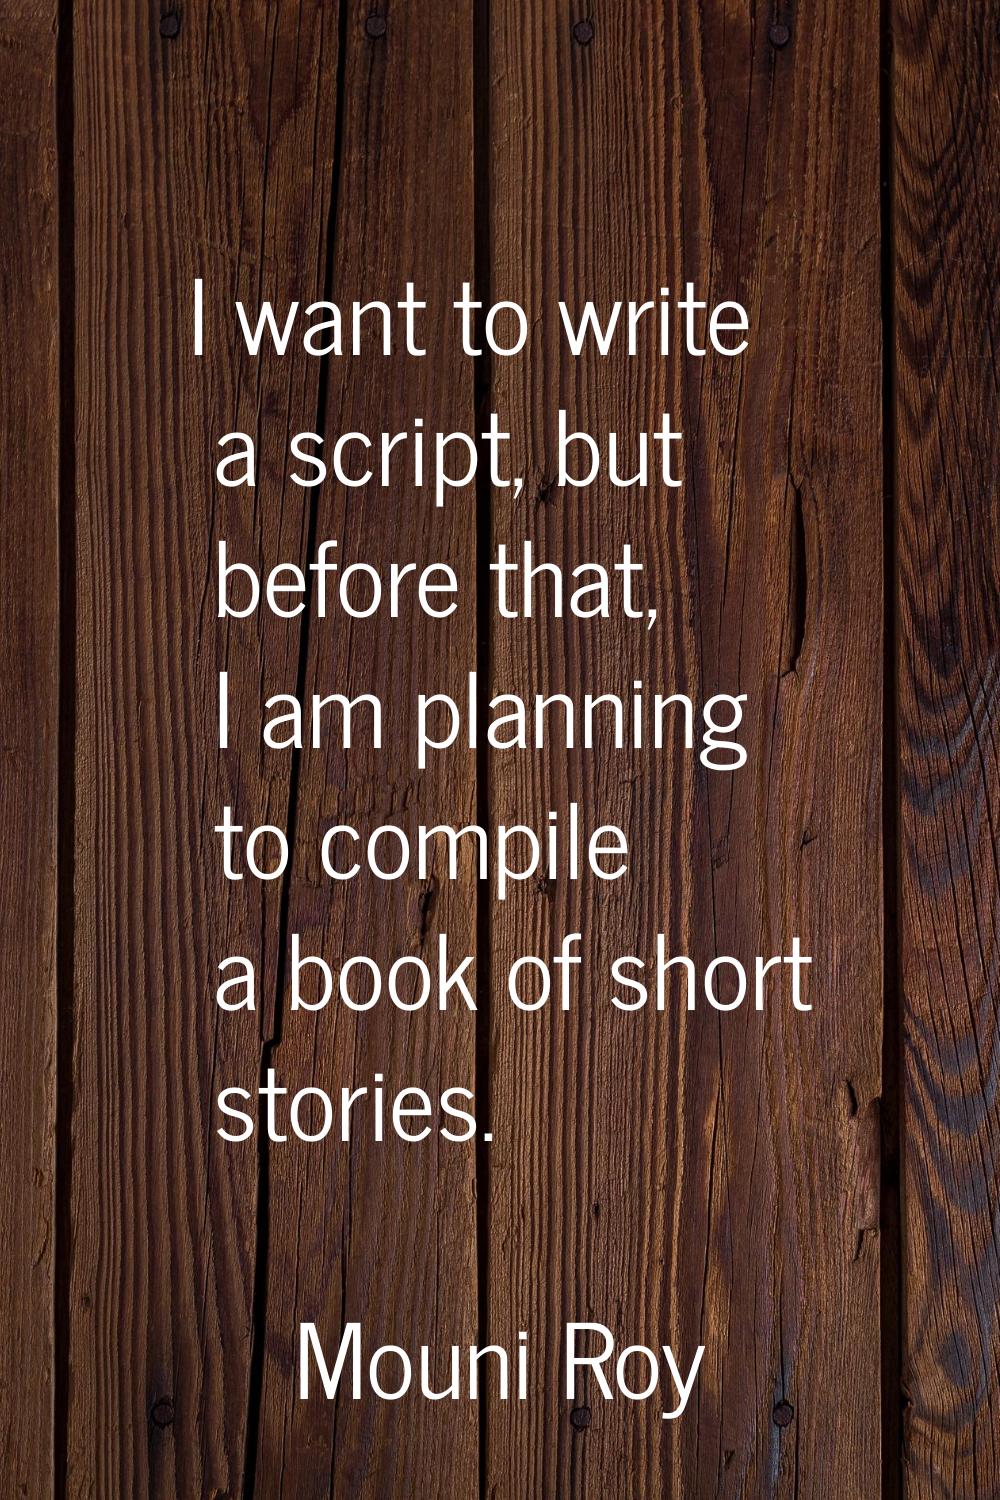 I want to write a script, but before that, I am planning to compile a book of short stories.